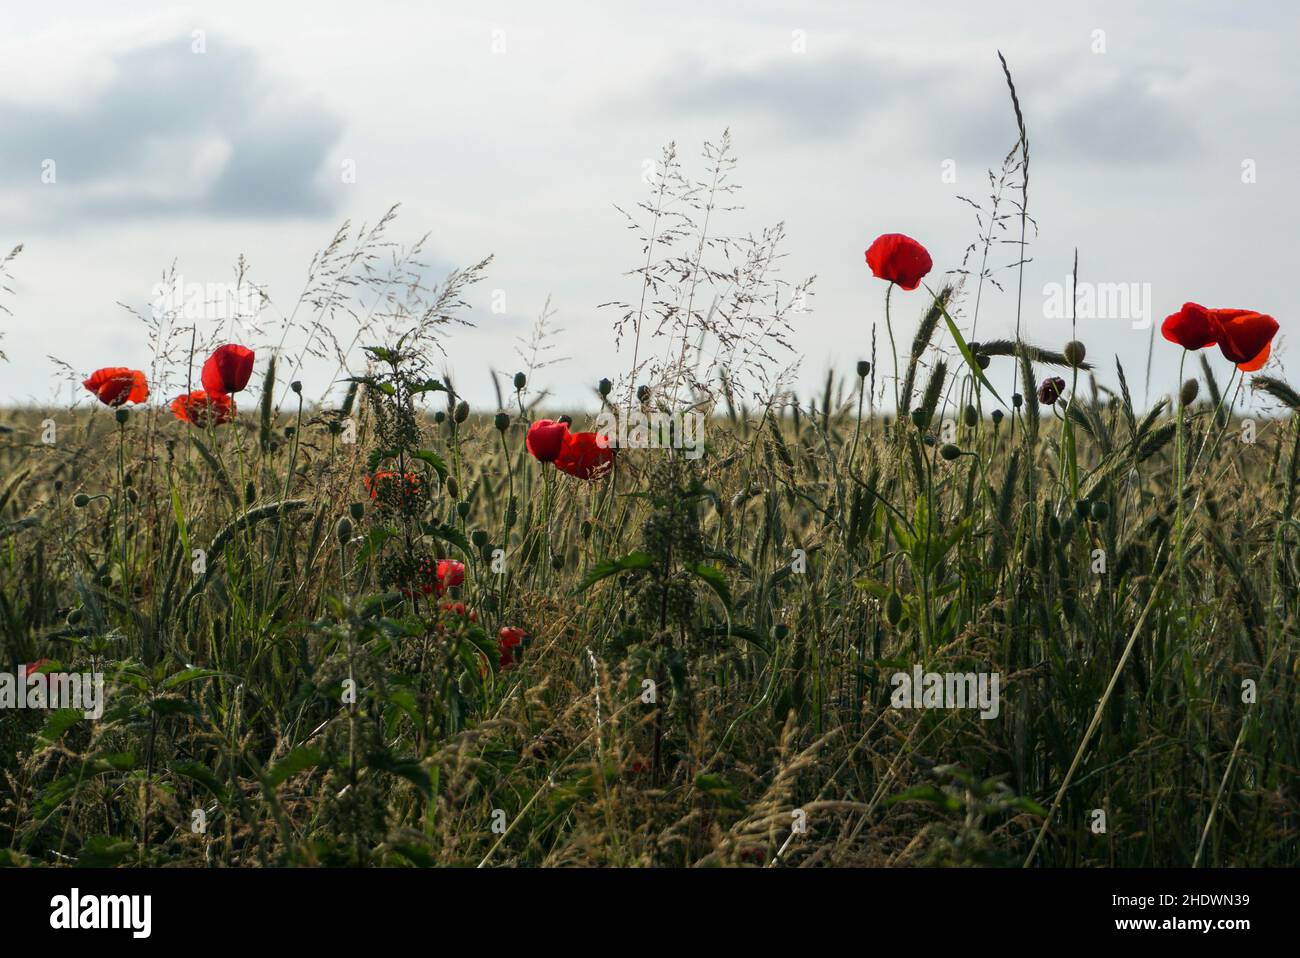 Beautiful view of red poppy flowers blooming in a field Stock Photo